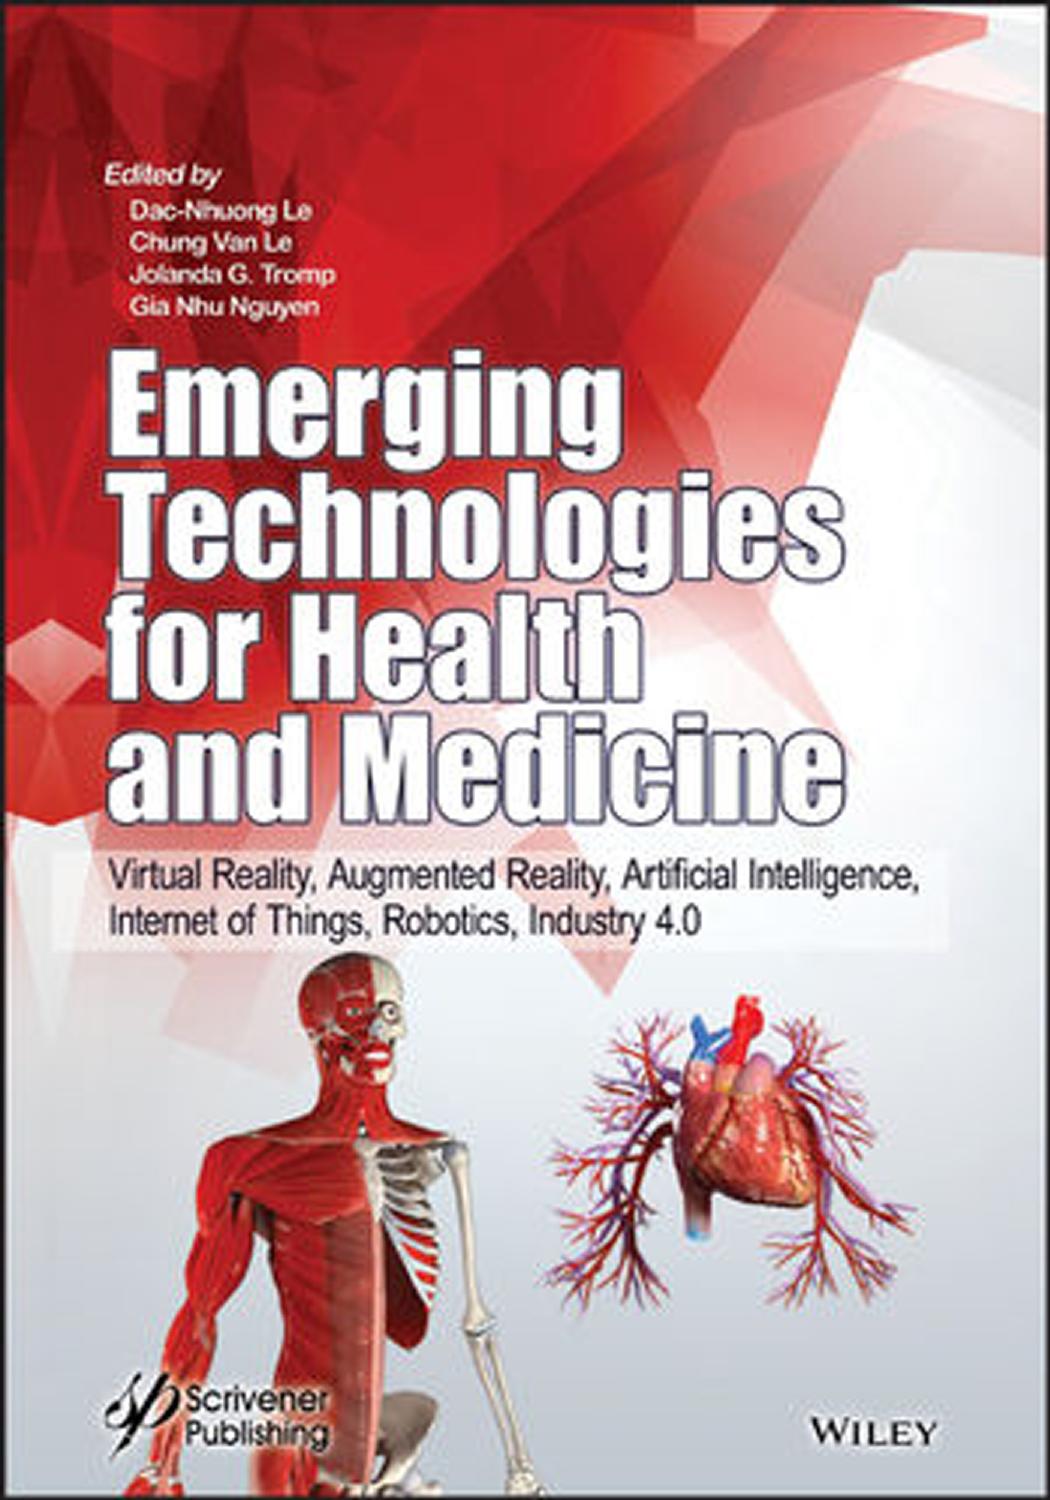 Emerging technologies for health and medicine virtual reality, augmented reality, artificial intelligence, 2018